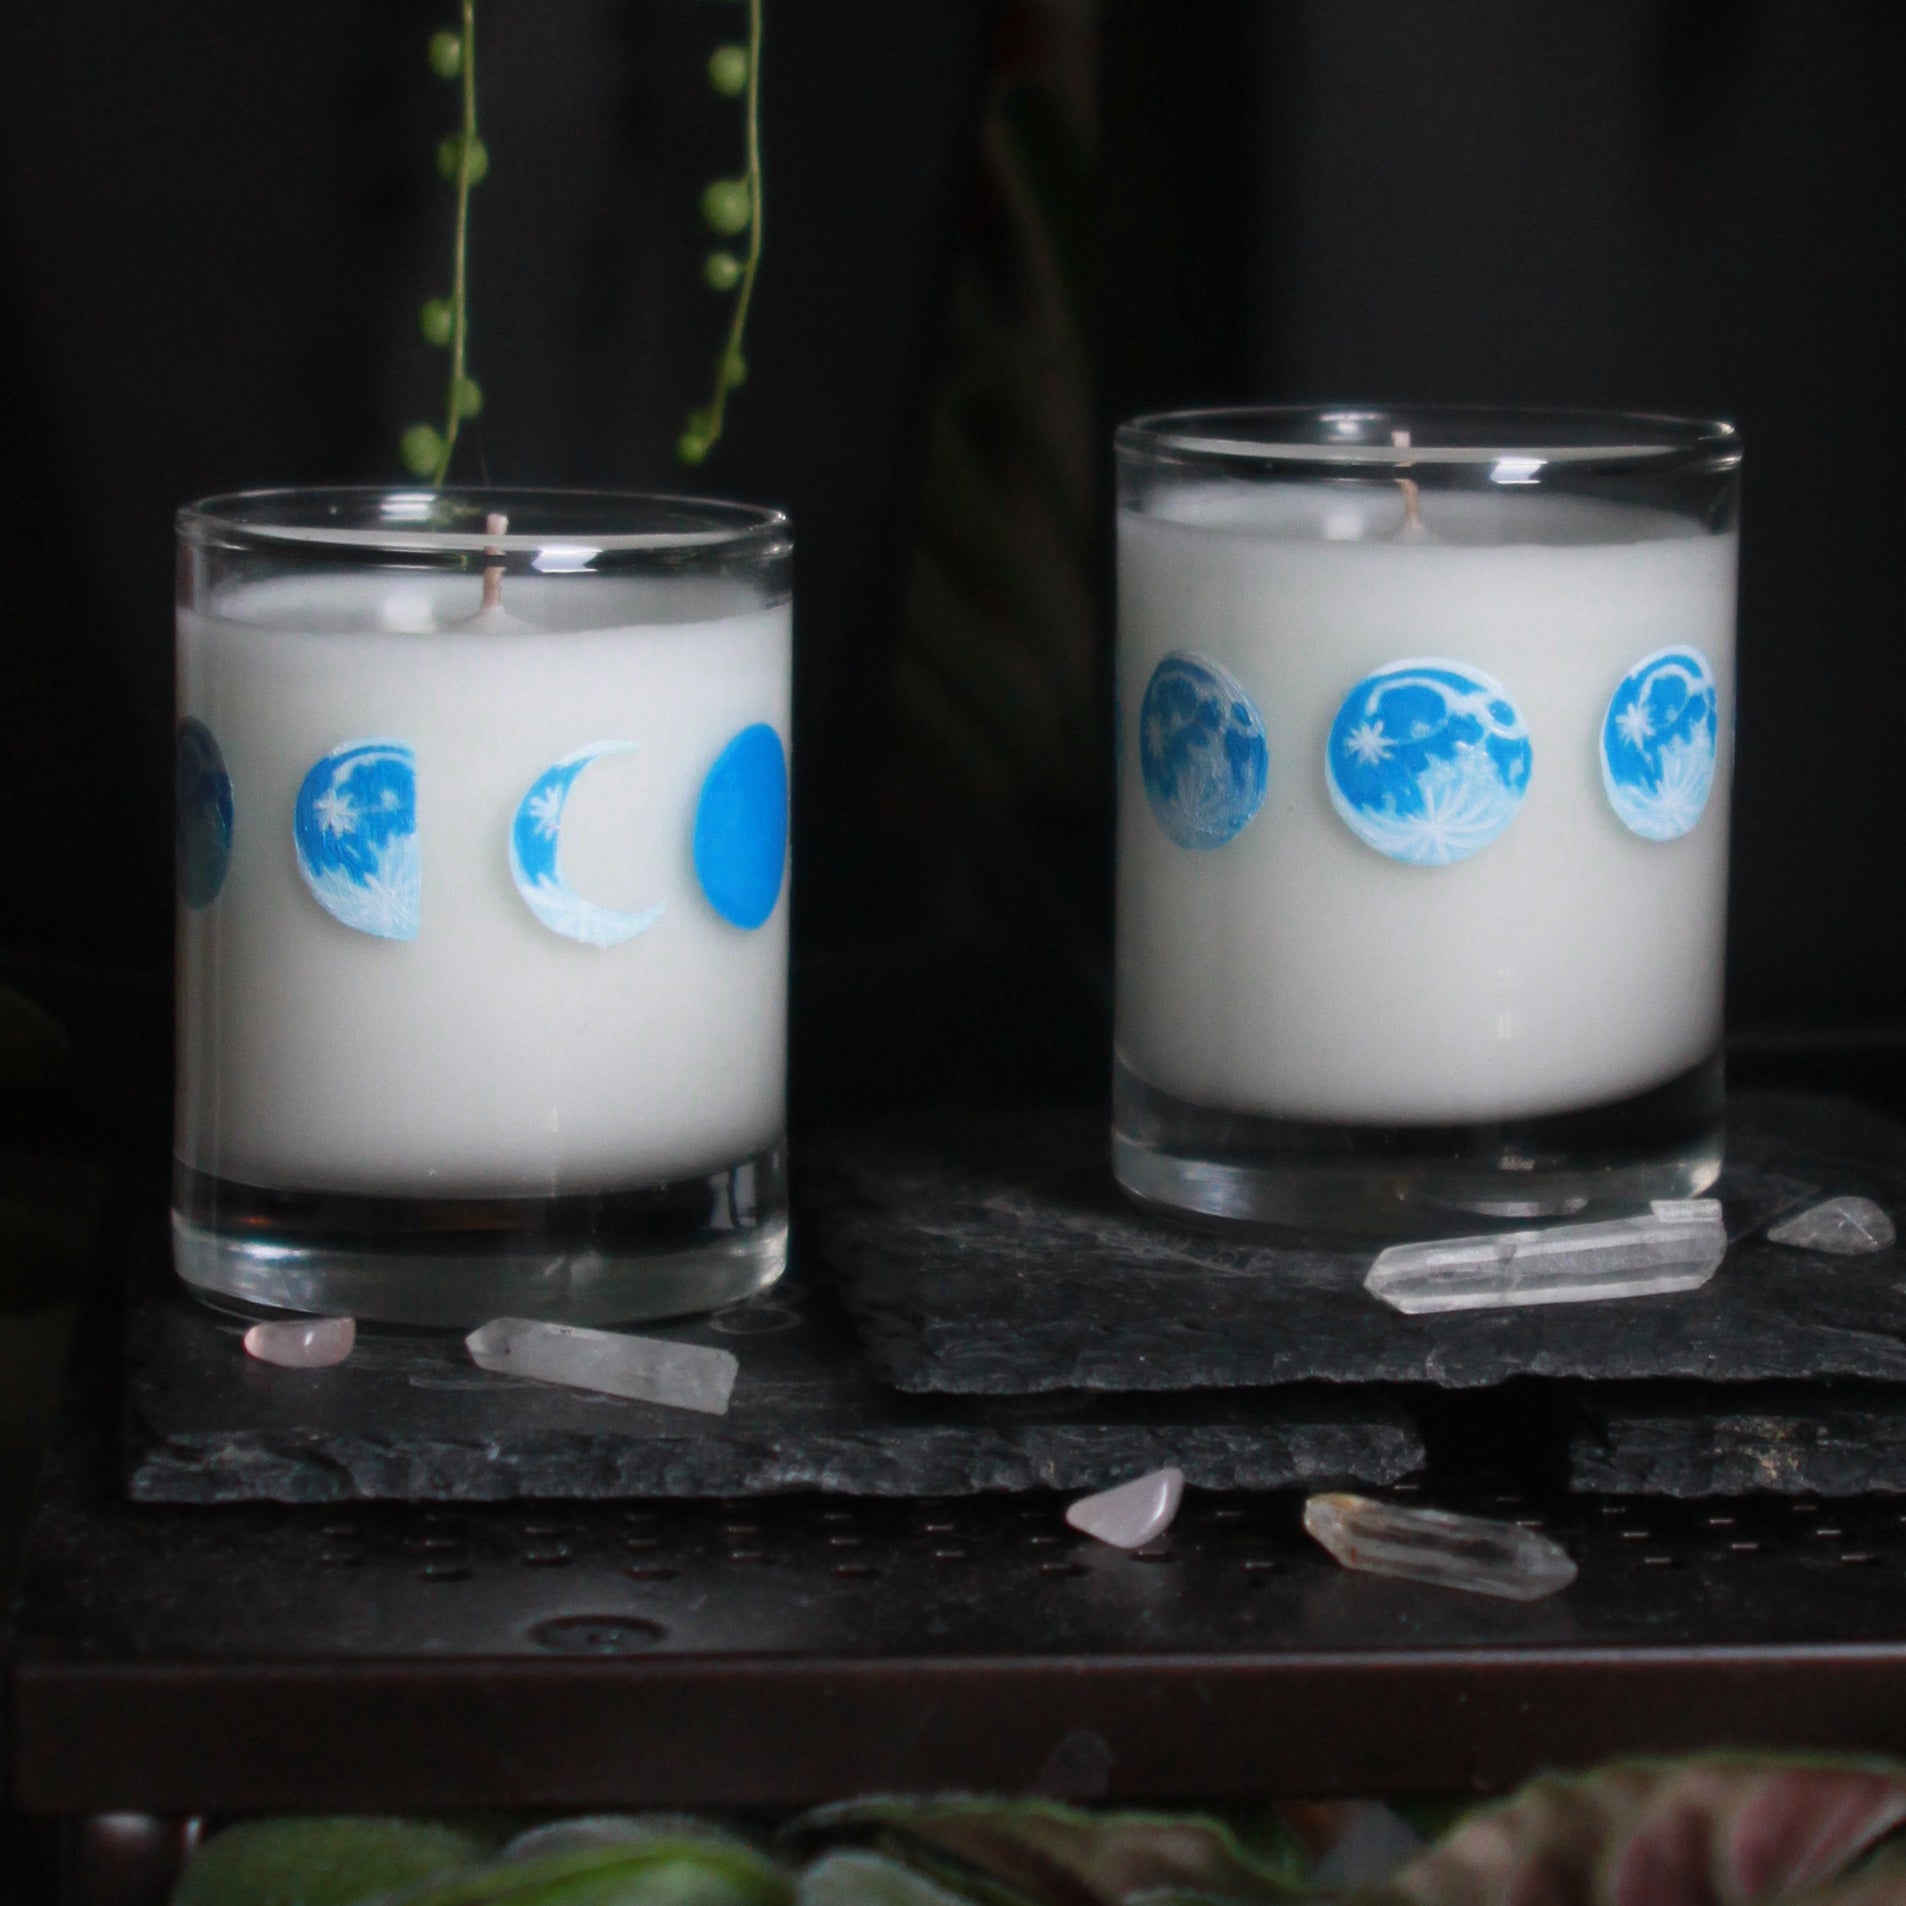 Two small votive glass candles with white wax rest on a dark surface and background. On each candle, 8 phases of the moon are painted in blue encircling the glass. The candle on the left is rotated so that the half moon, quarter moon, and new moon are visible. The candle on the right is facing forward showing the full moon between two gibbous moons.